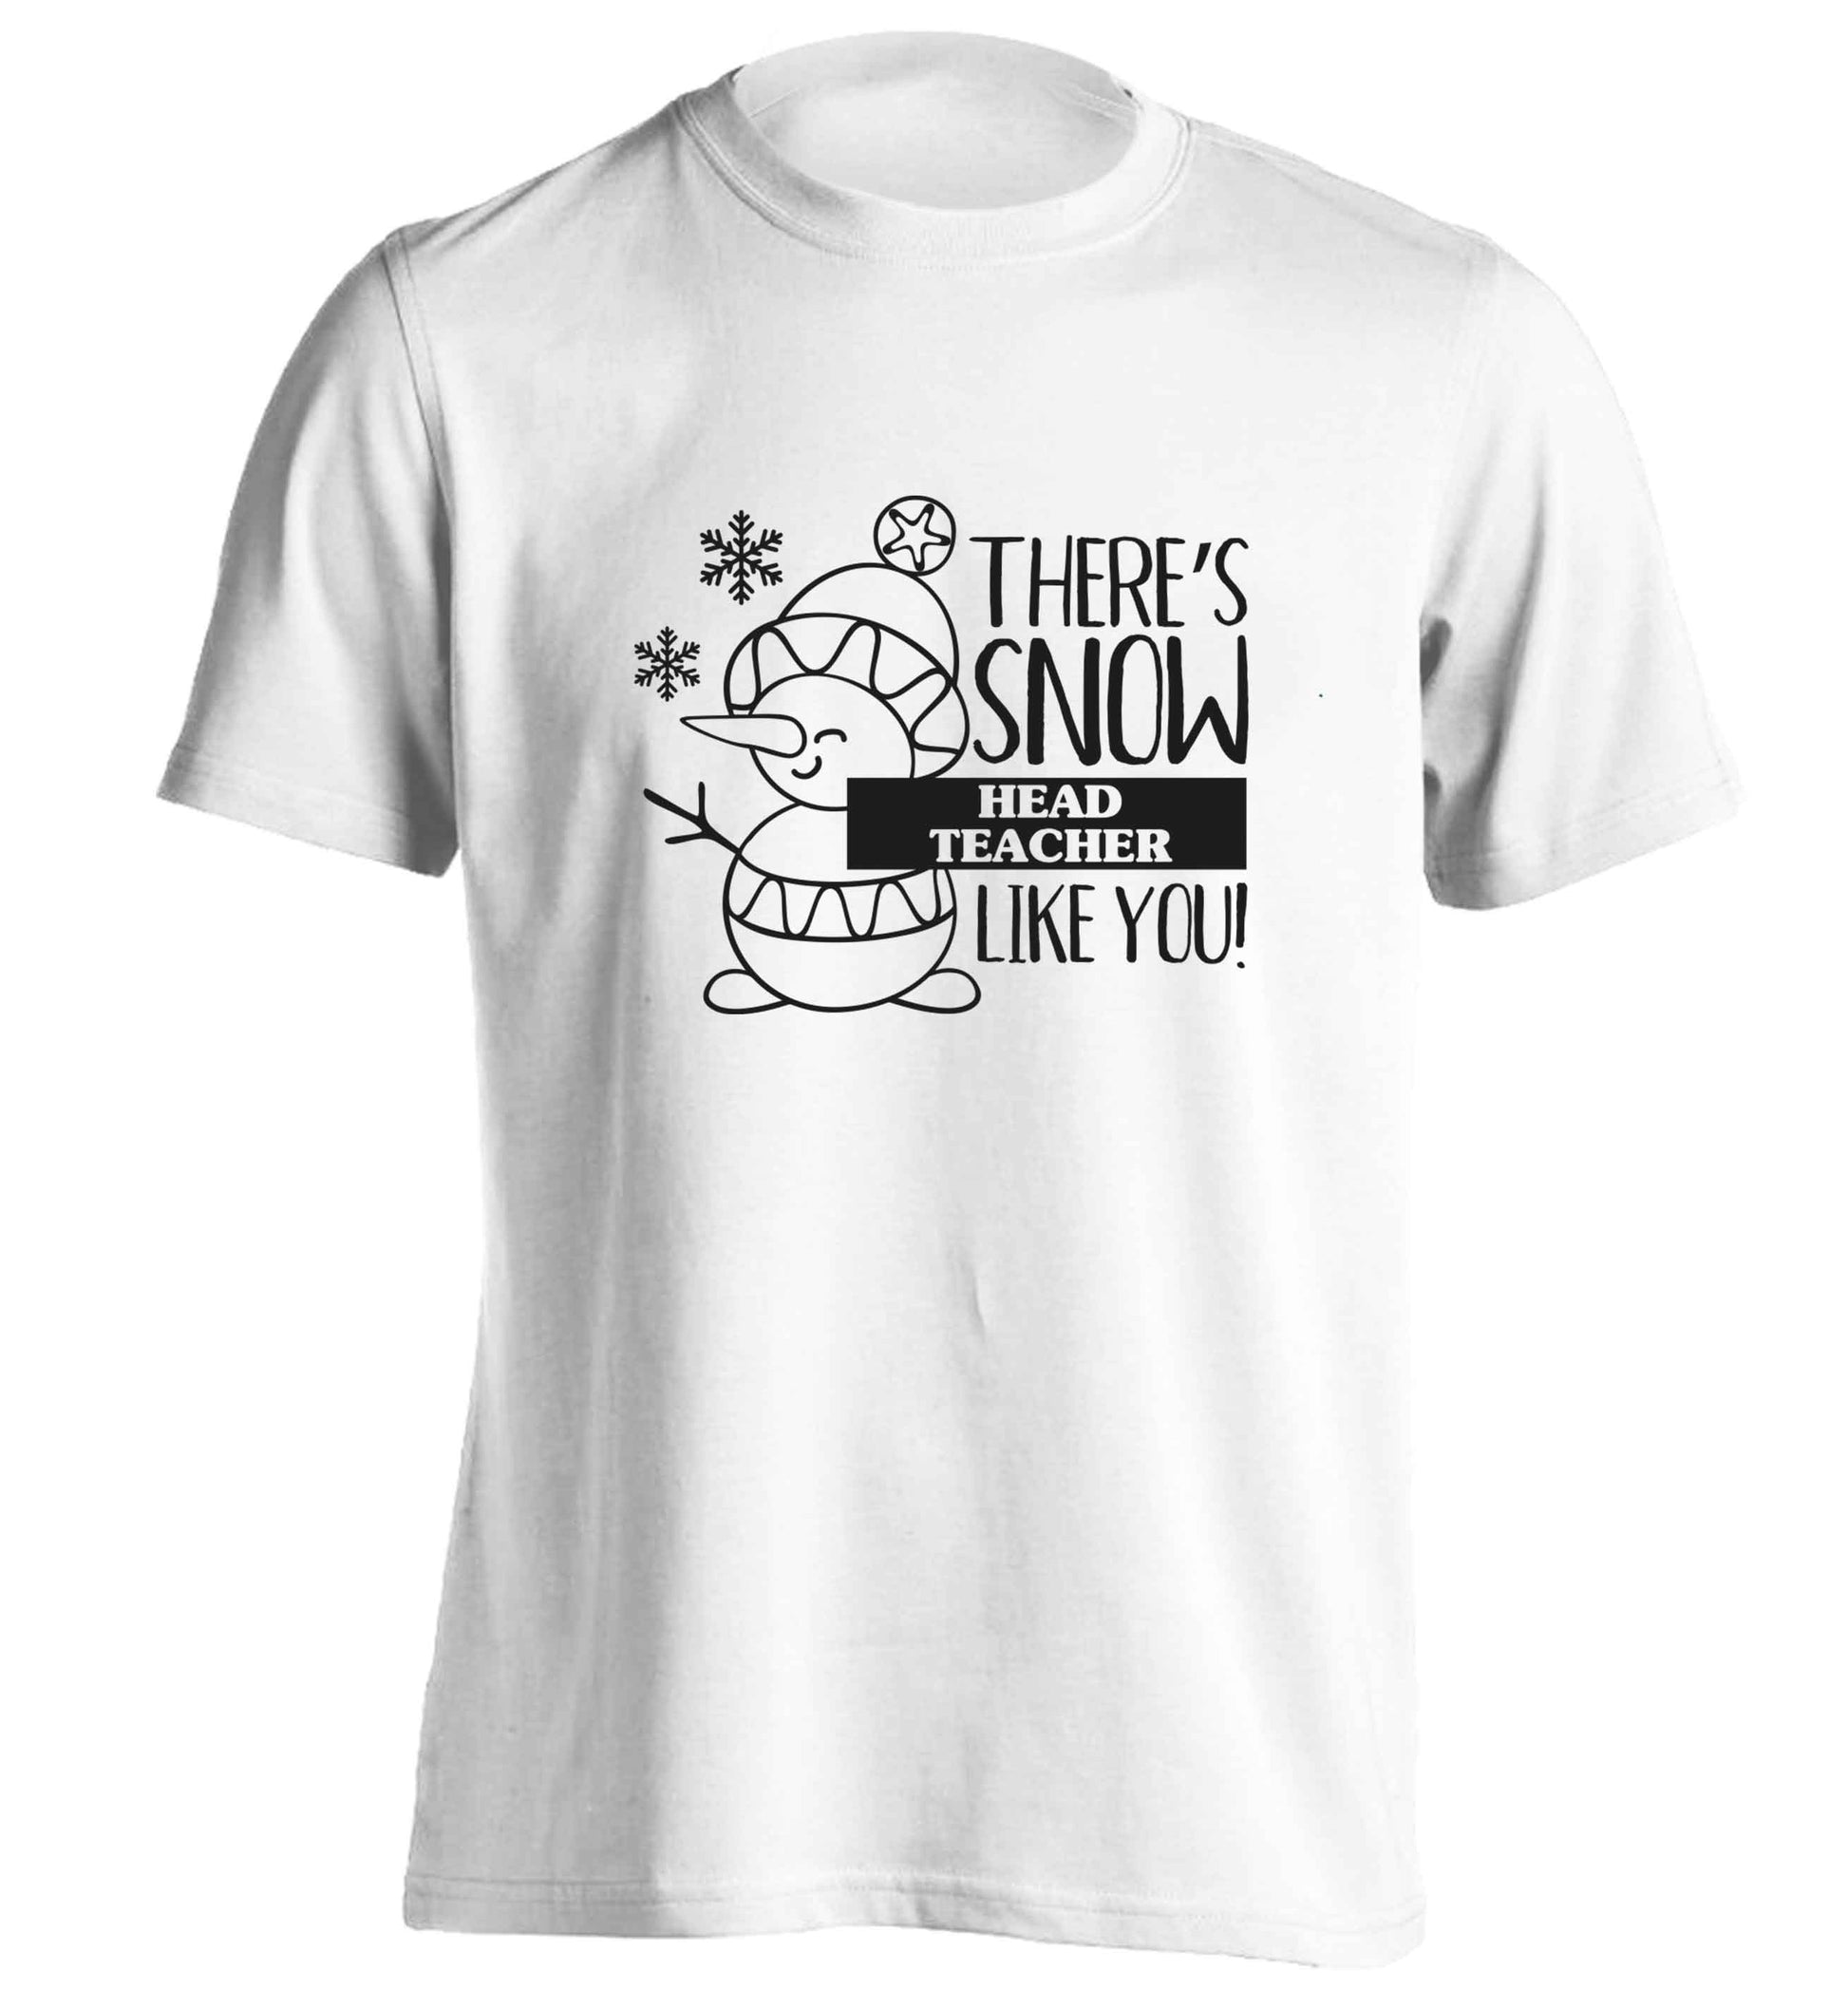 There's snow head teacher like you adults unisex white Tshirt 2XL